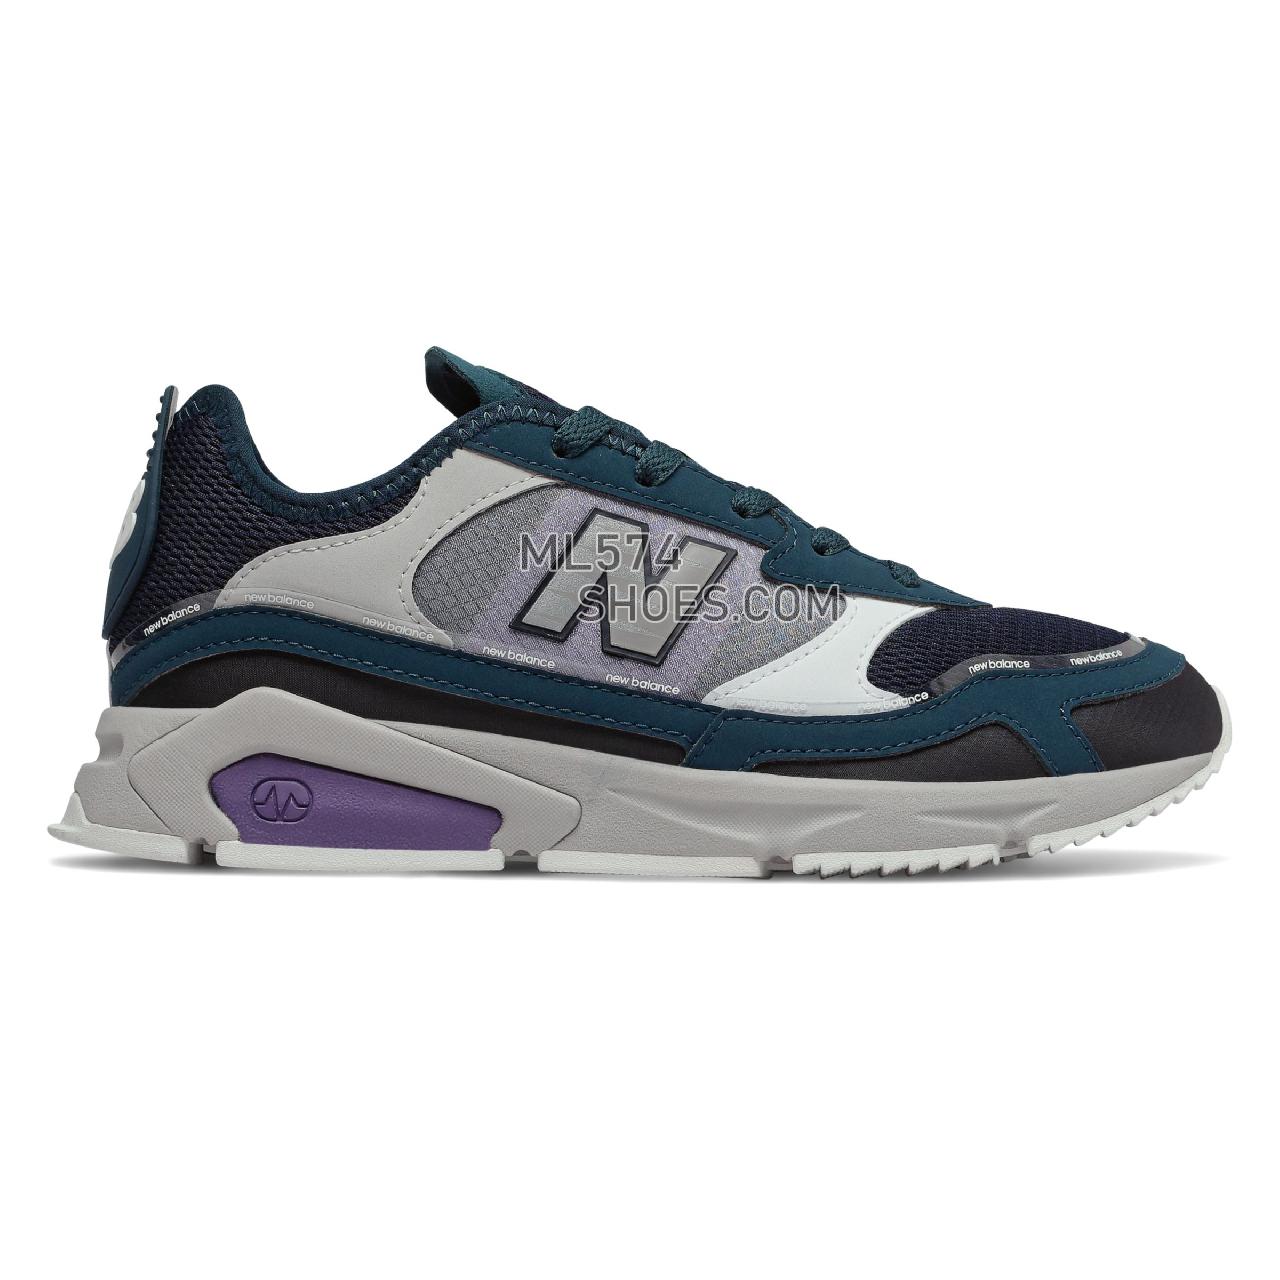 New Balance X-Racer - Women's Sport Style Sneakers - Supercell with Black and Violet Fluorite - WSXRCHFC